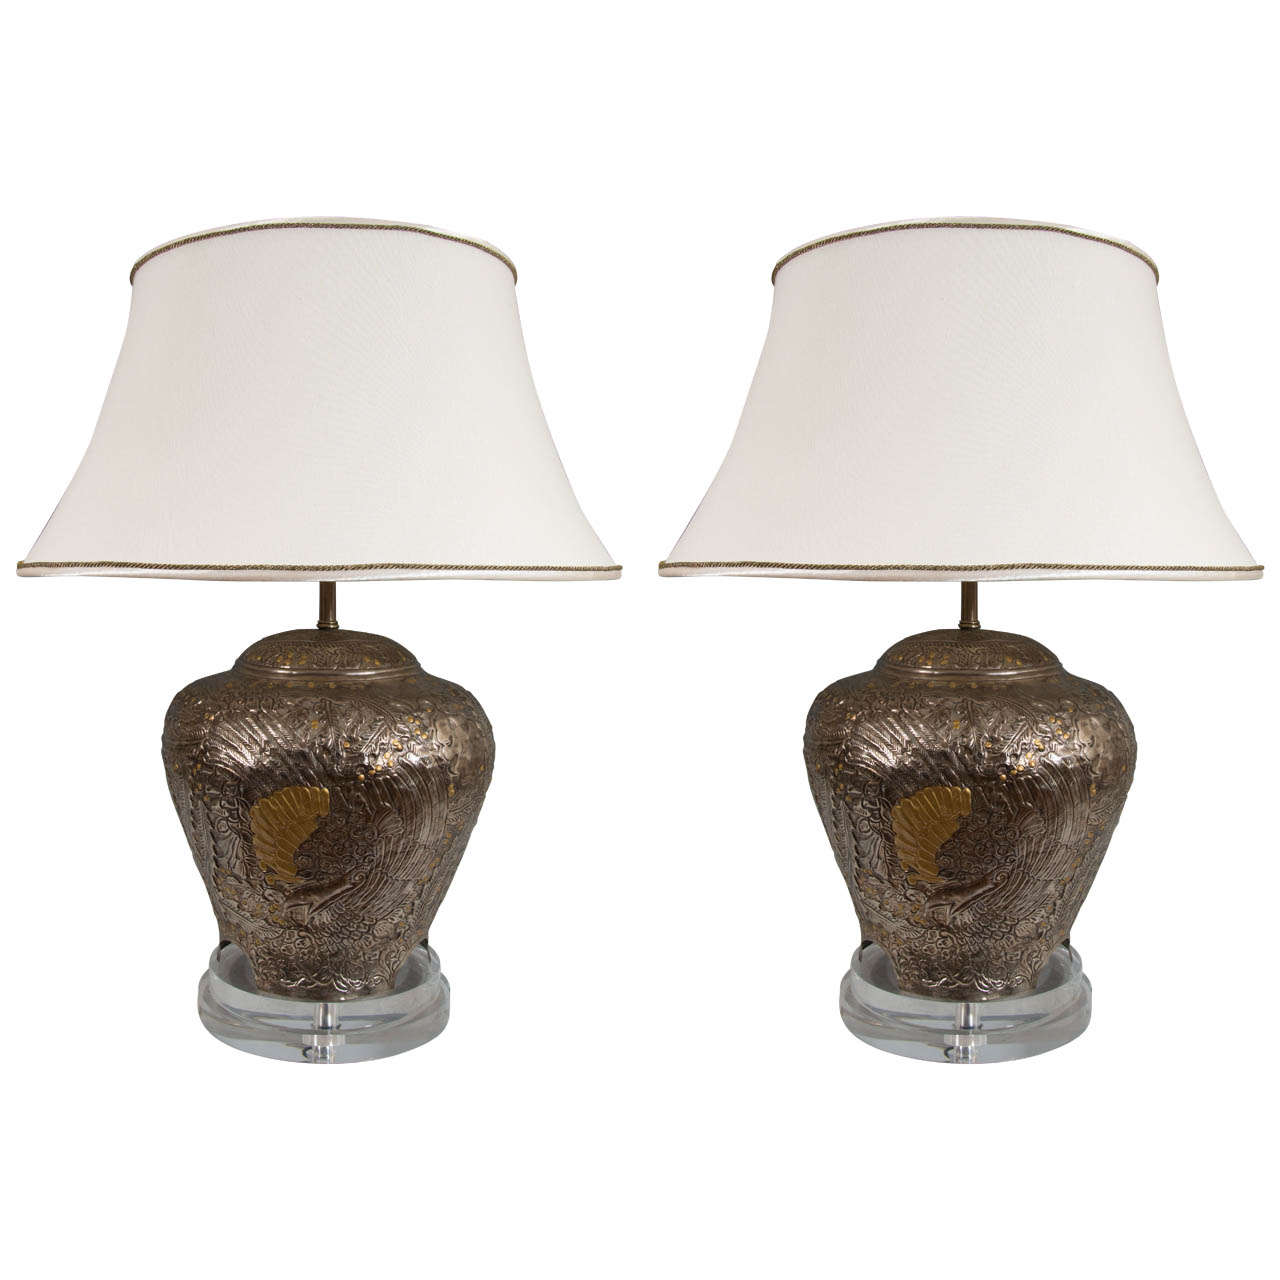 A Pair of Hammer Pewter and Brass Table Lamps